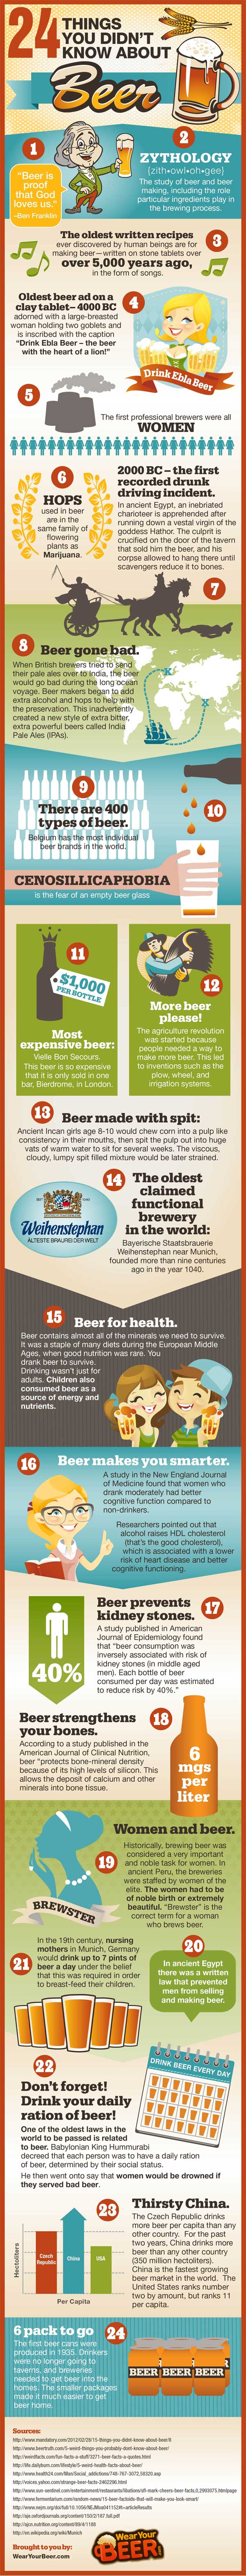 24 Things You Didn't Know About Beer!